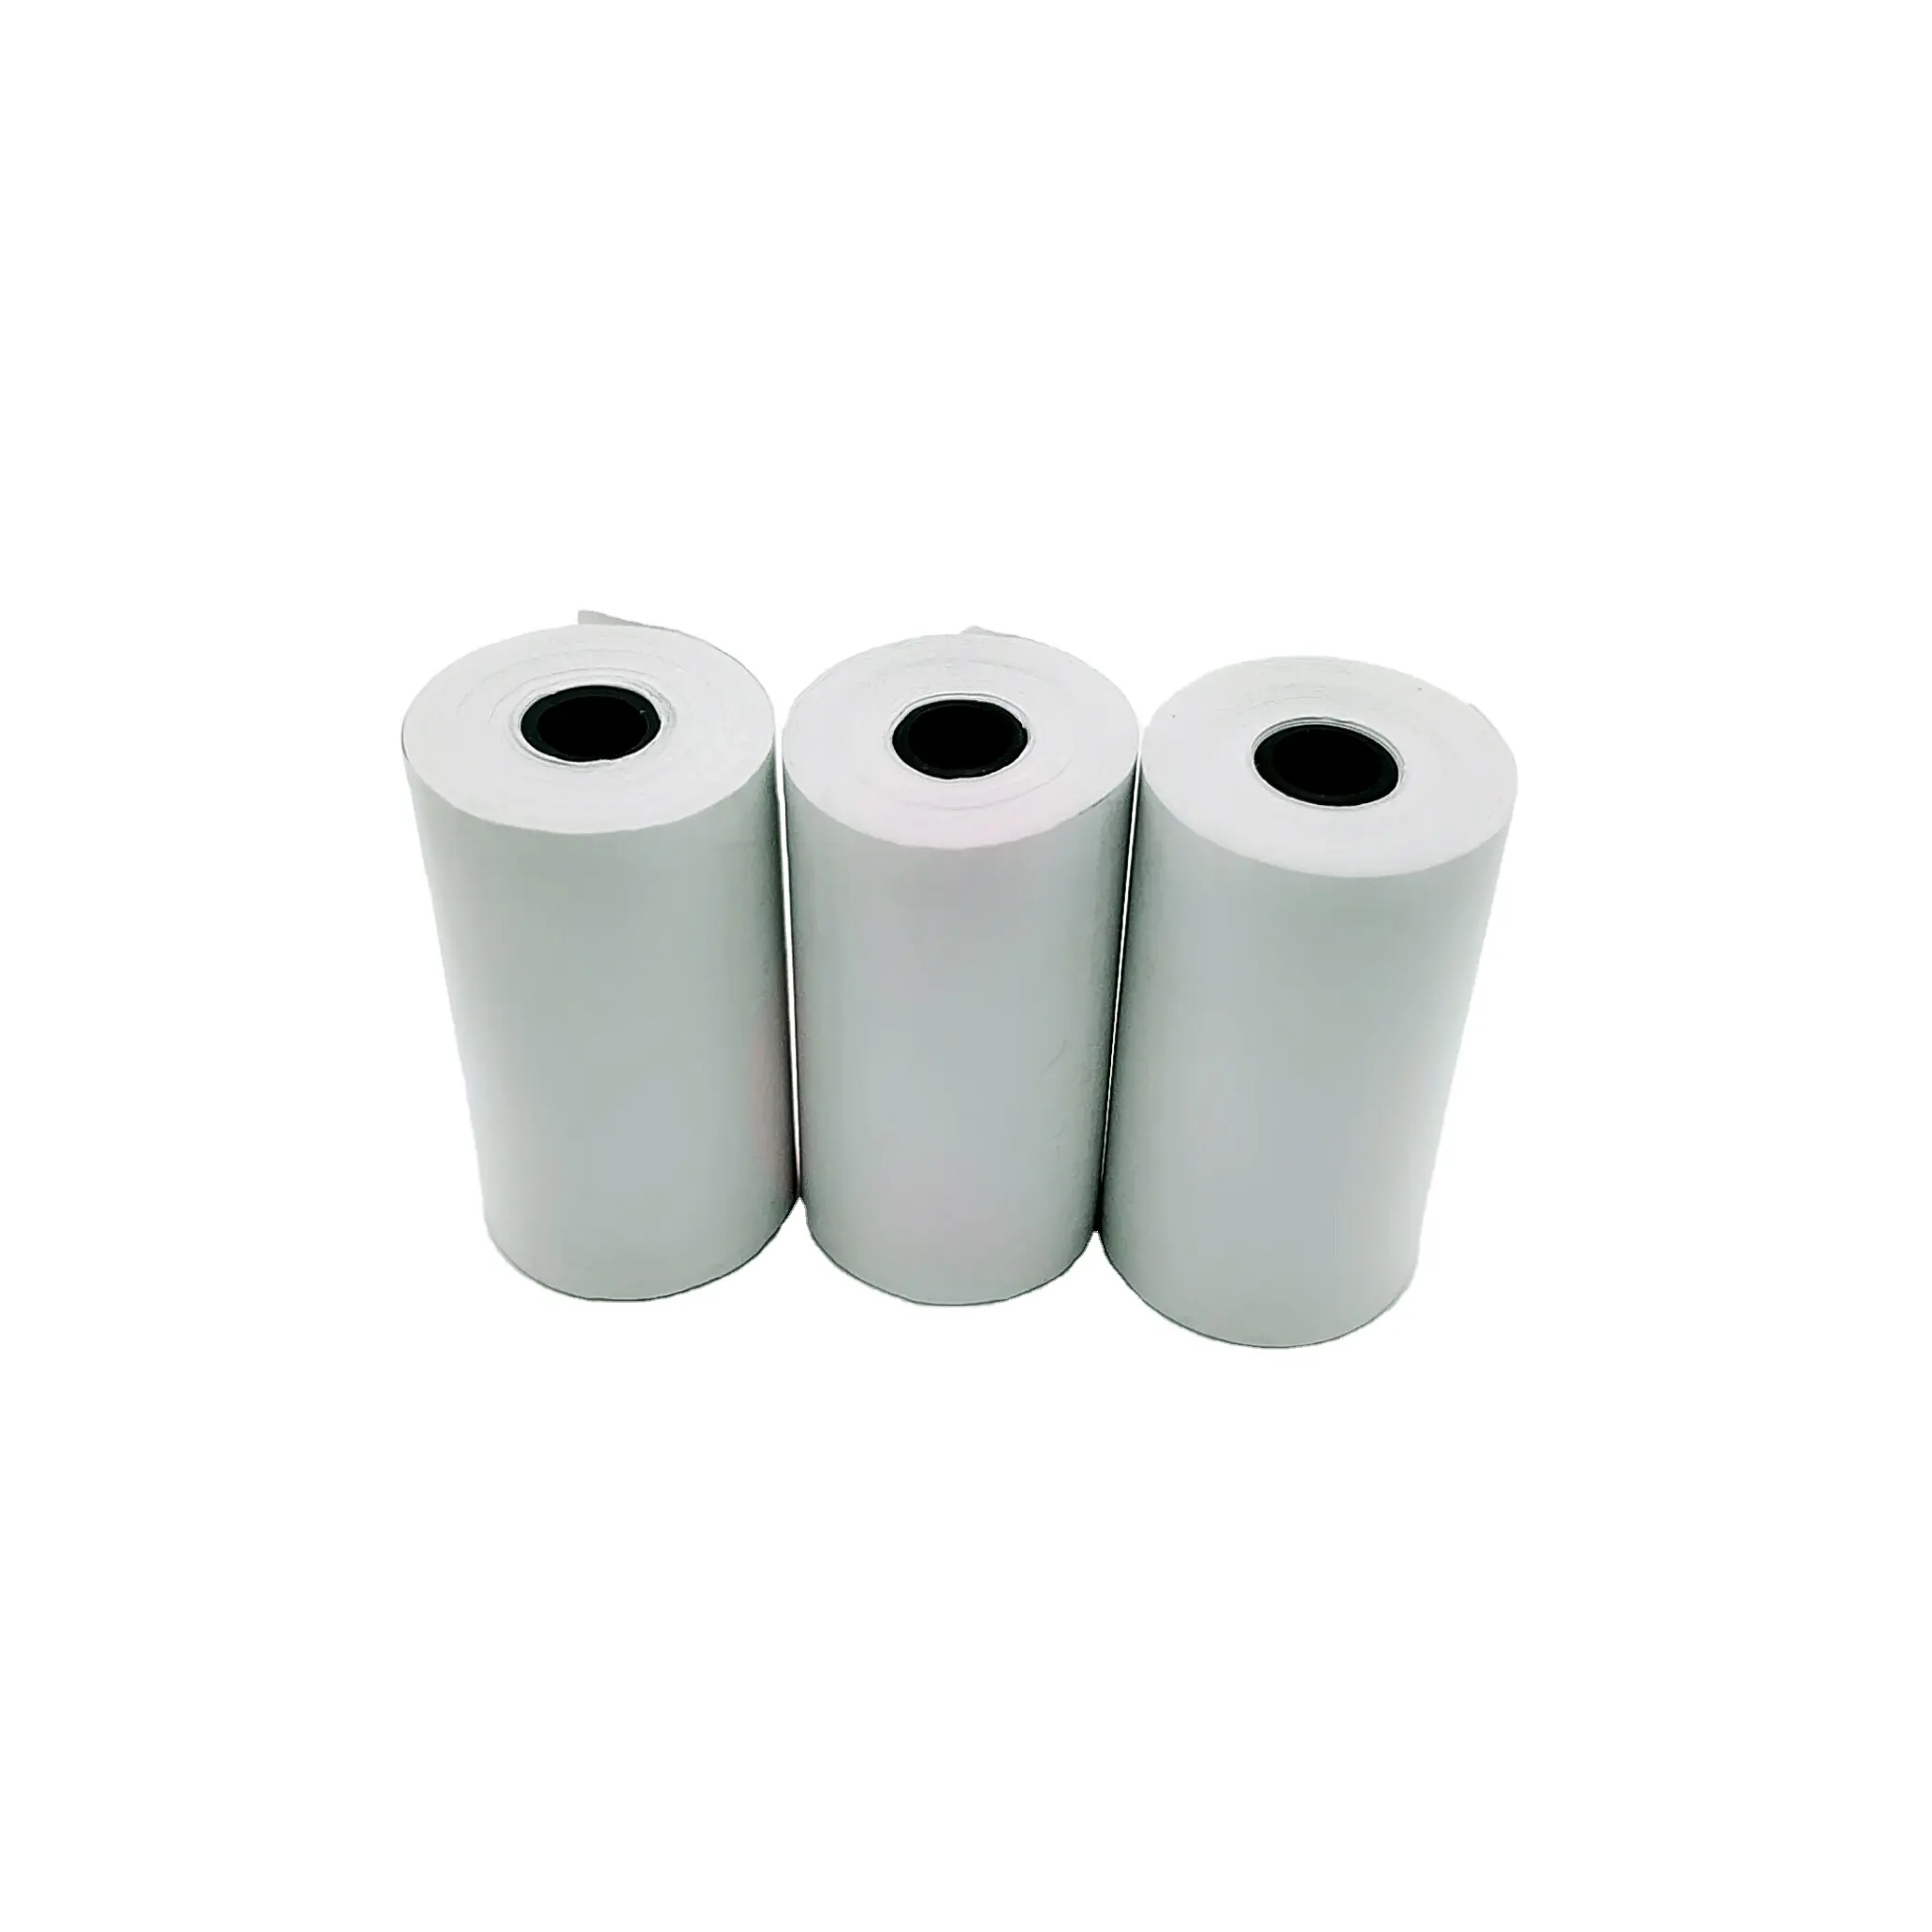 Customizable Thermal Paper Waybill Thermal Paper A6 Printer Thermal Paper